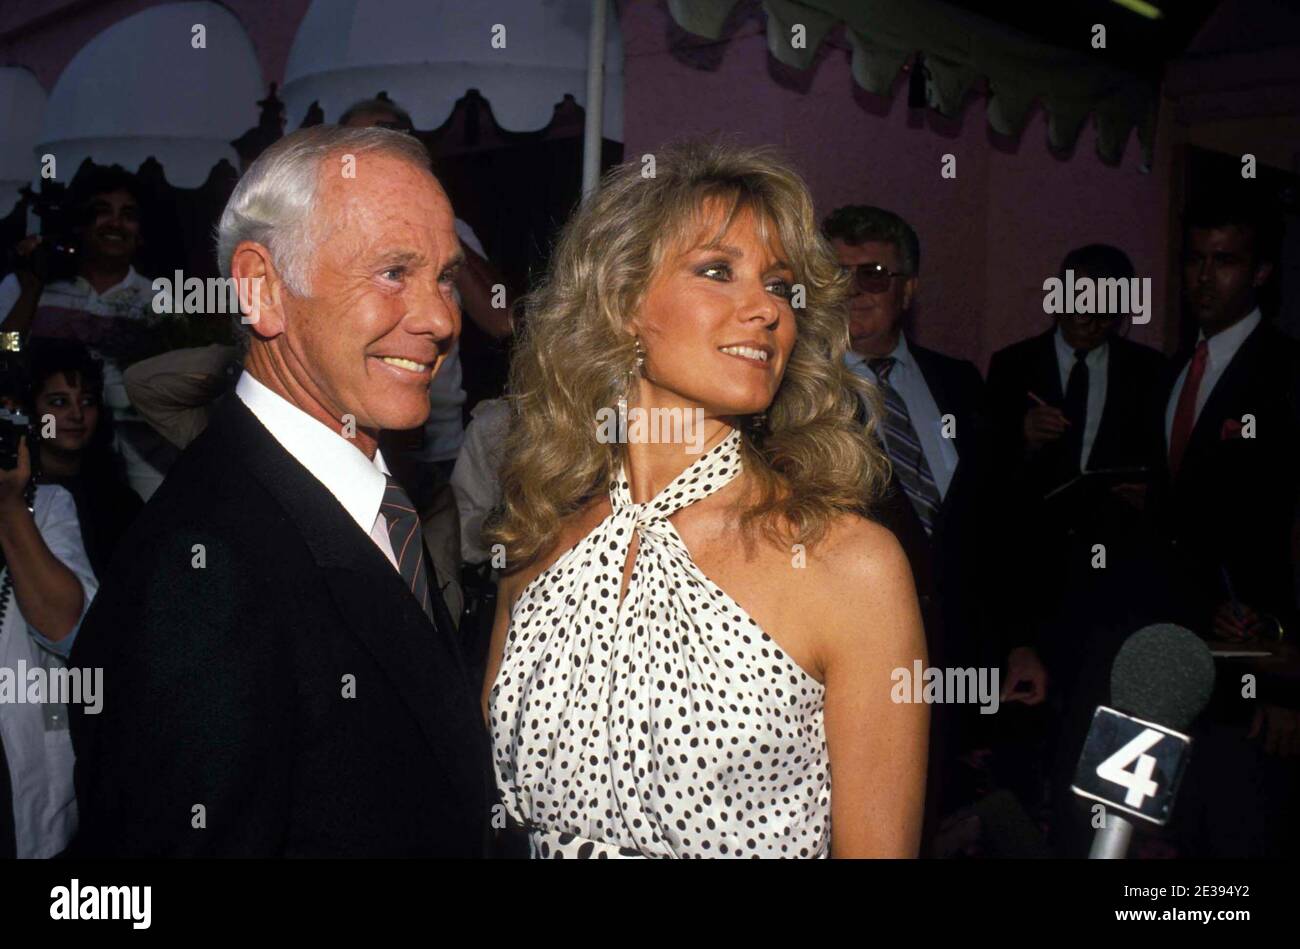 Johnny Carson And Alexis Maas 1988 Credit Ralph Dominguez/MediaPunch